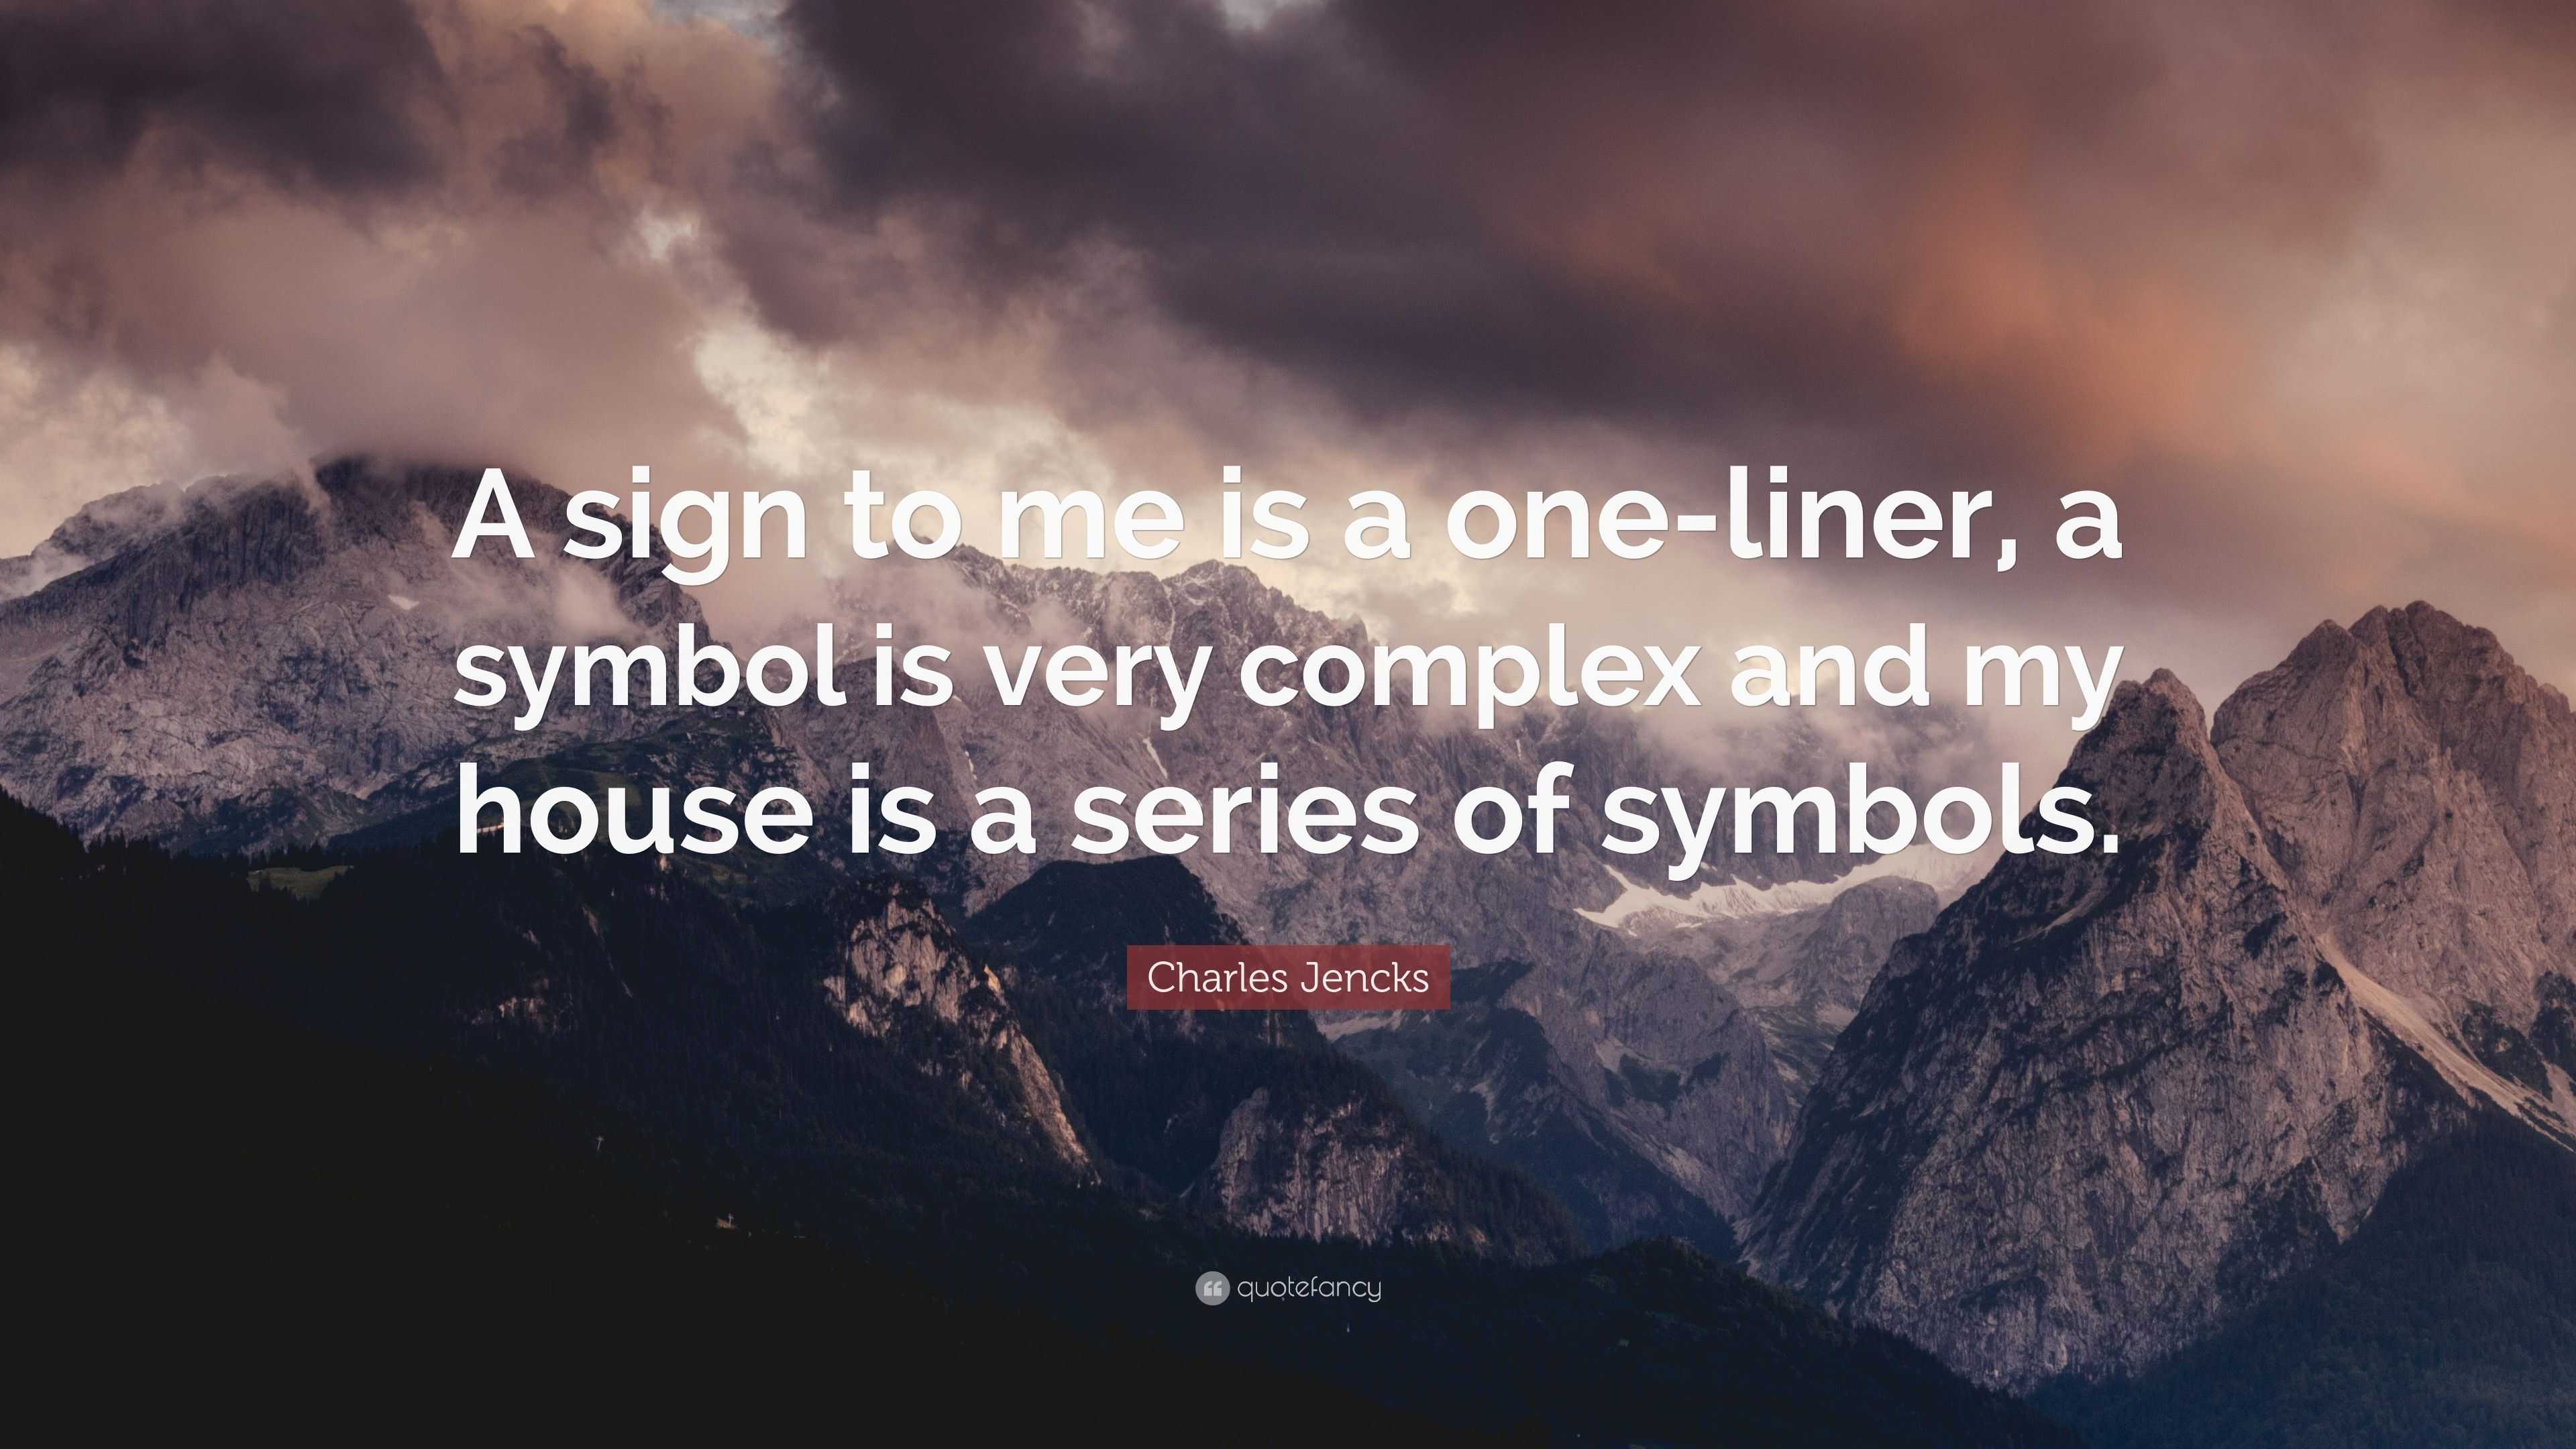 Charles Jencks Quote: “A sign to me is a one-liner, a symbol is